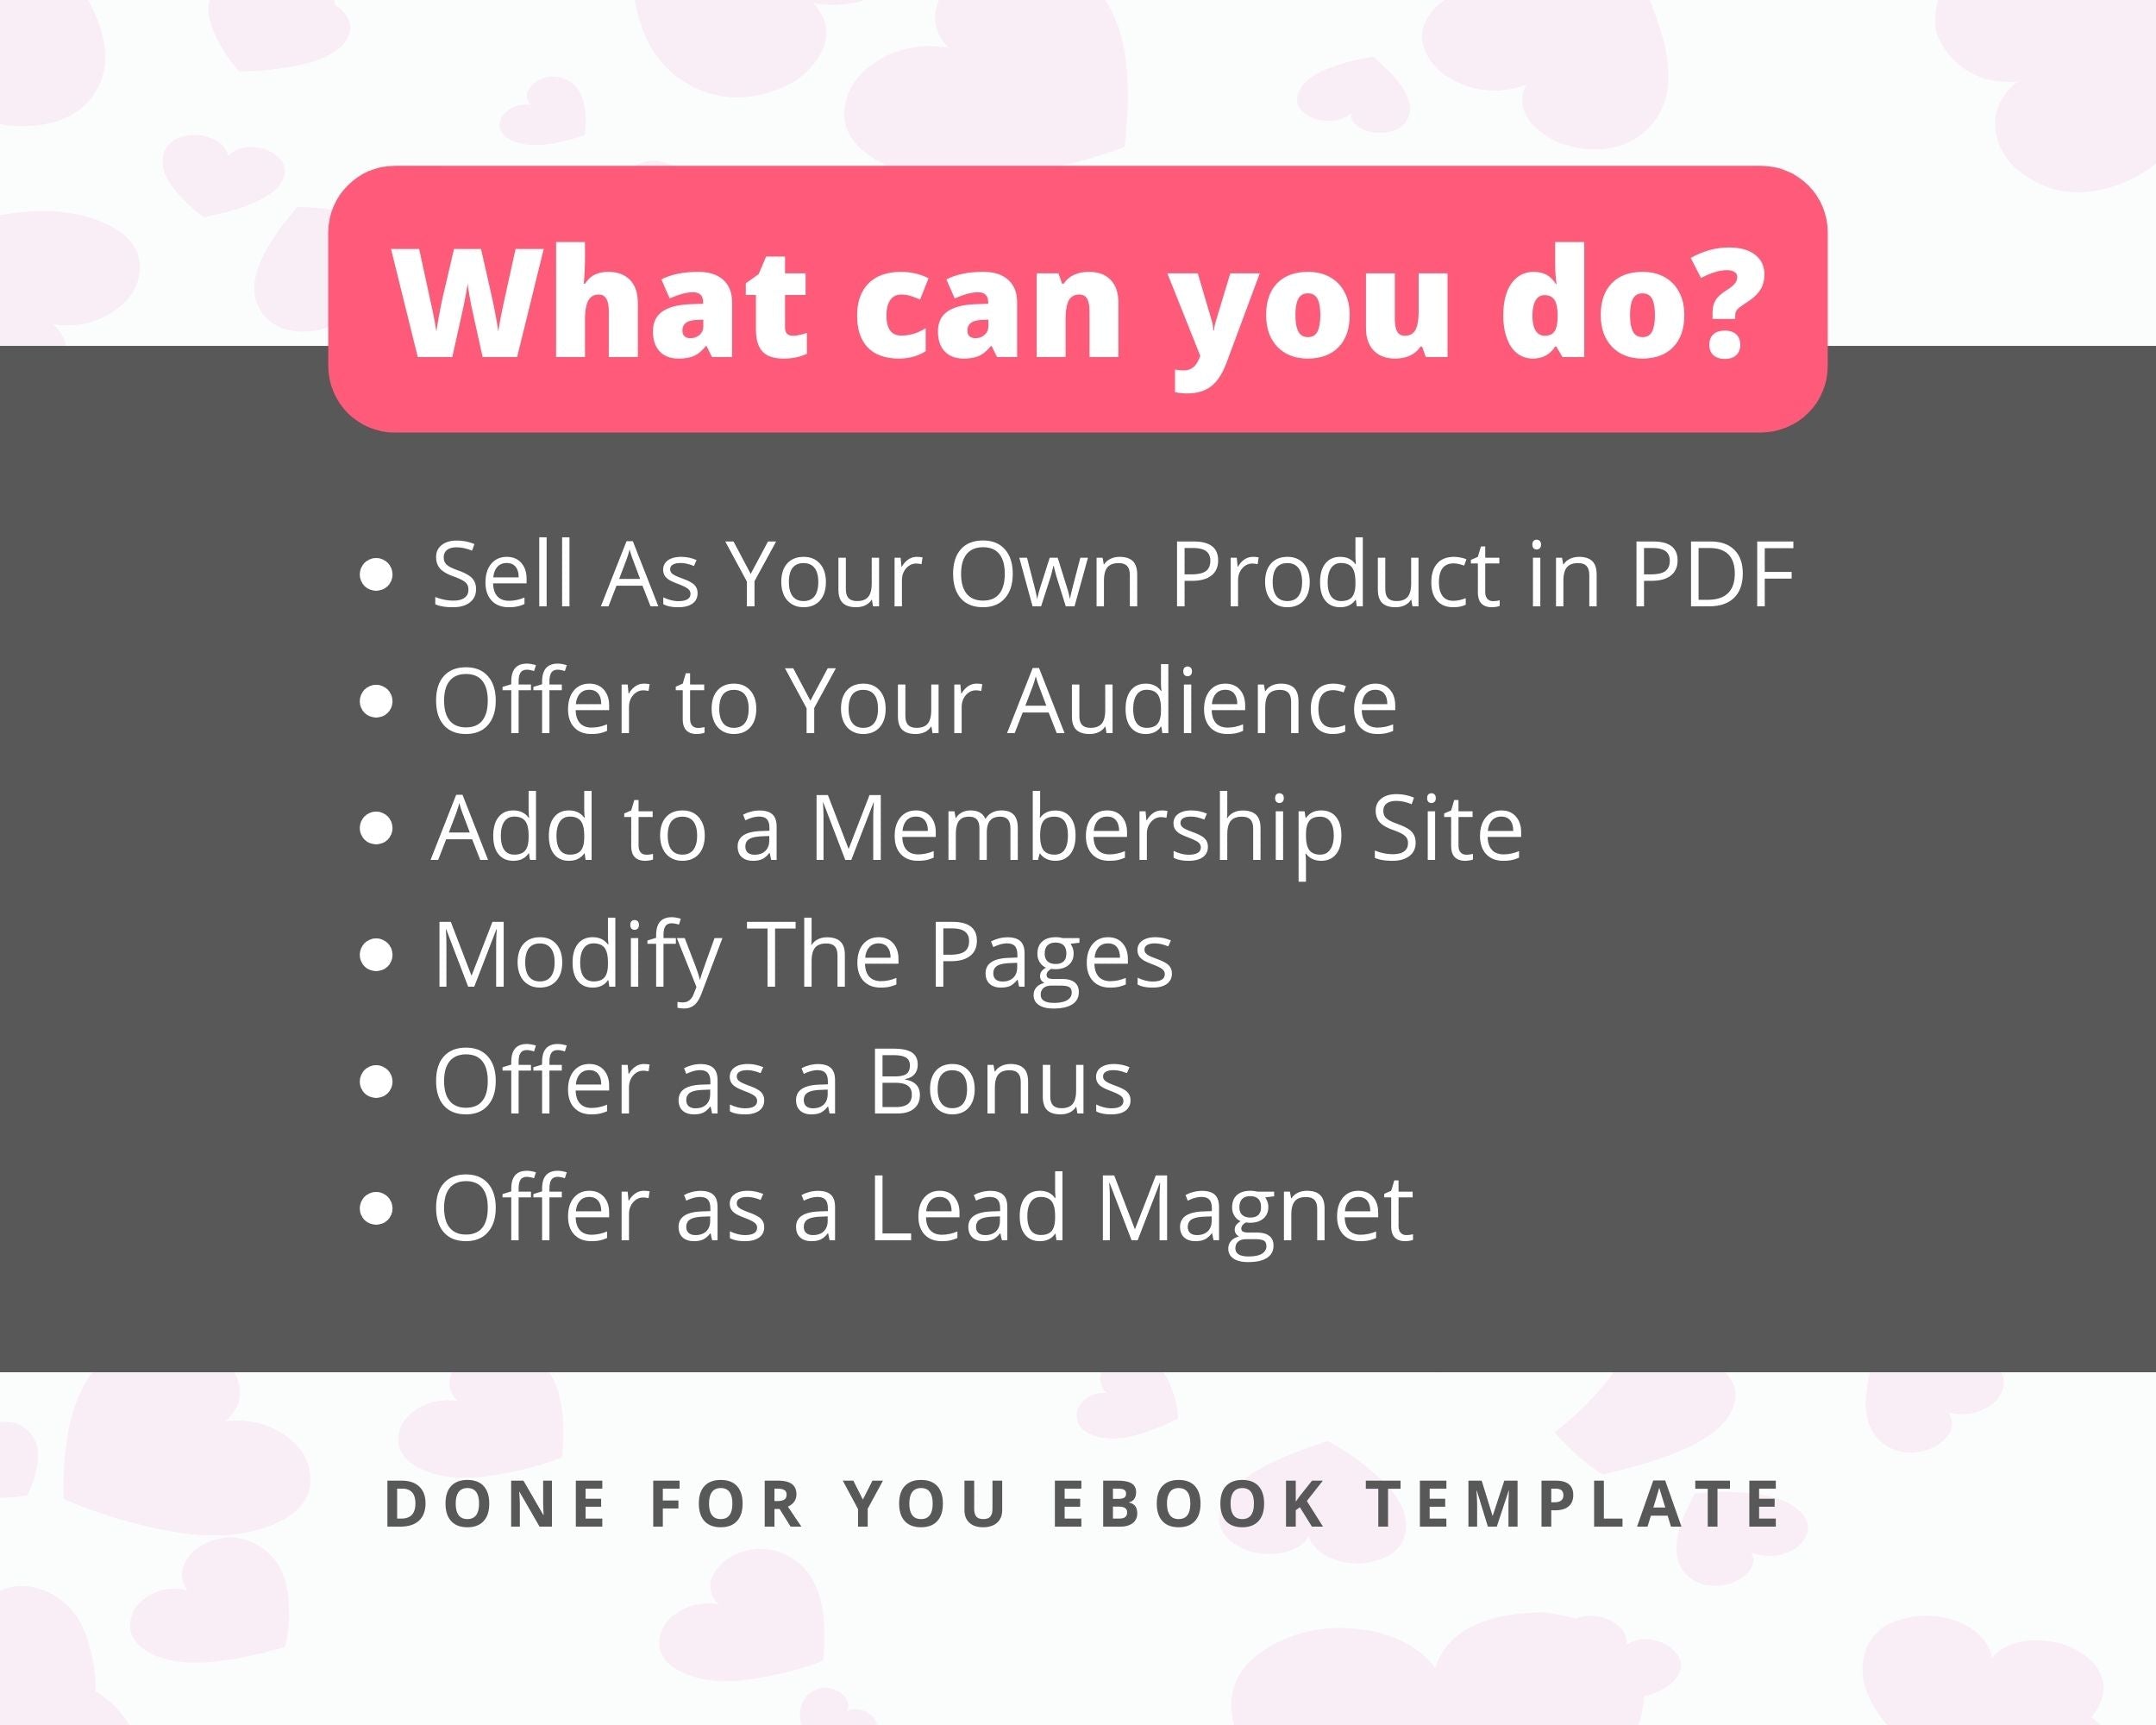 Editable After Breakup Guide | Done-for-You Ebook in Canva | Rebrandable and Resizable Canva Template